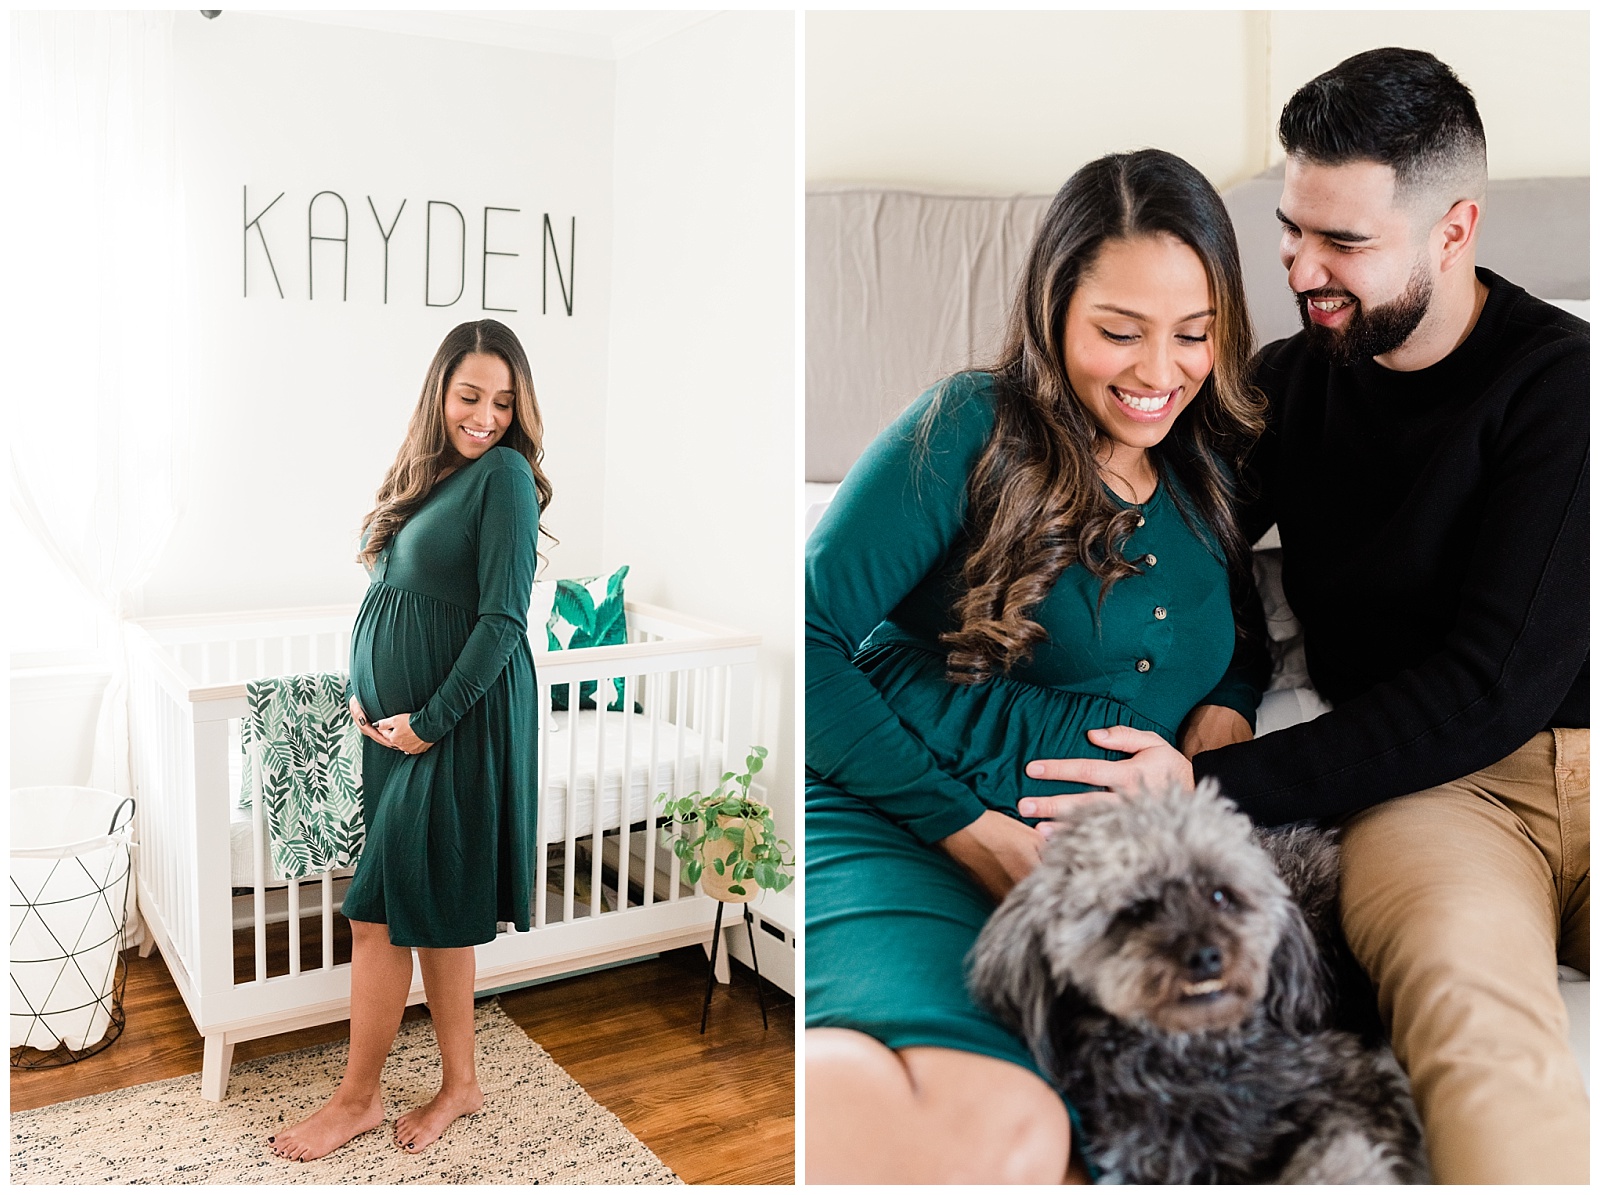 In Home Maternity Session, Nursery, Baby, New Parents, Maternity Shoot, Pregnant, Pregnancy Photos, New Jersey, Photographer, Baby Boy, Jungle Nursery, Photo, Dog, Pet, Furbaby